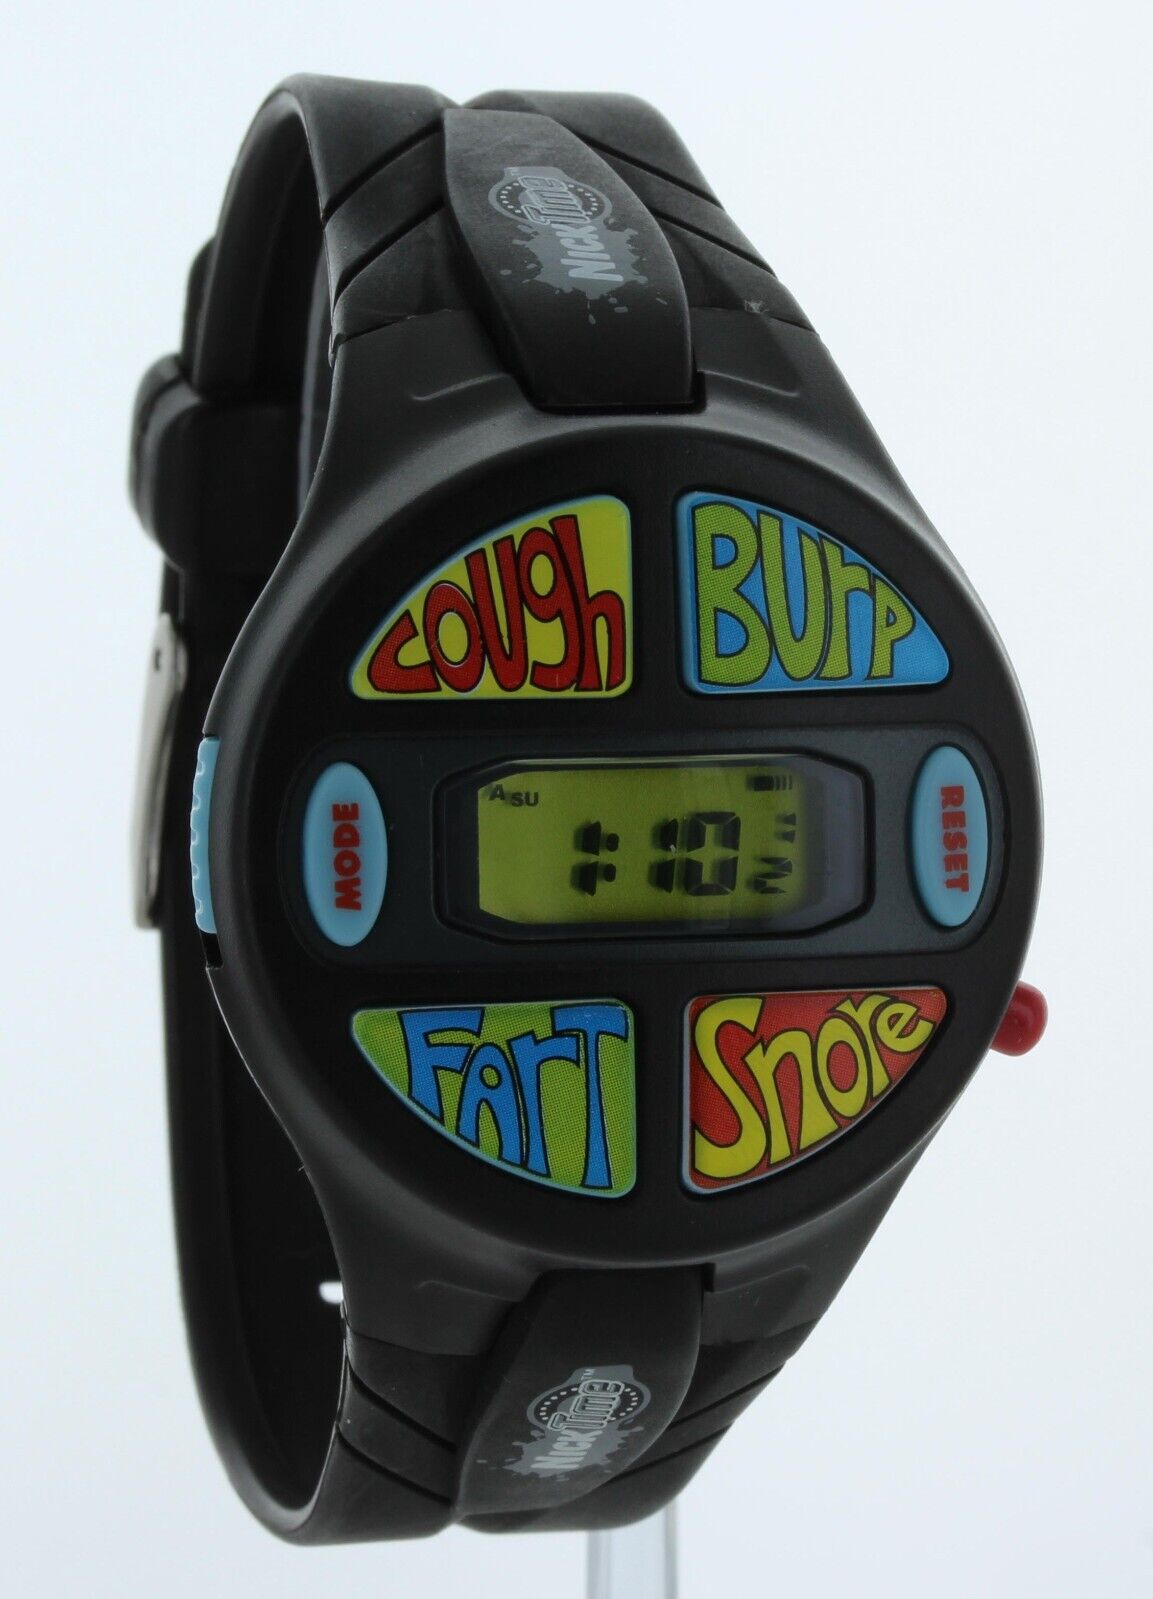 Vintage, Nick time Silly Sounds Watch with four Sounds Cough, Burp,  Fart, Snore